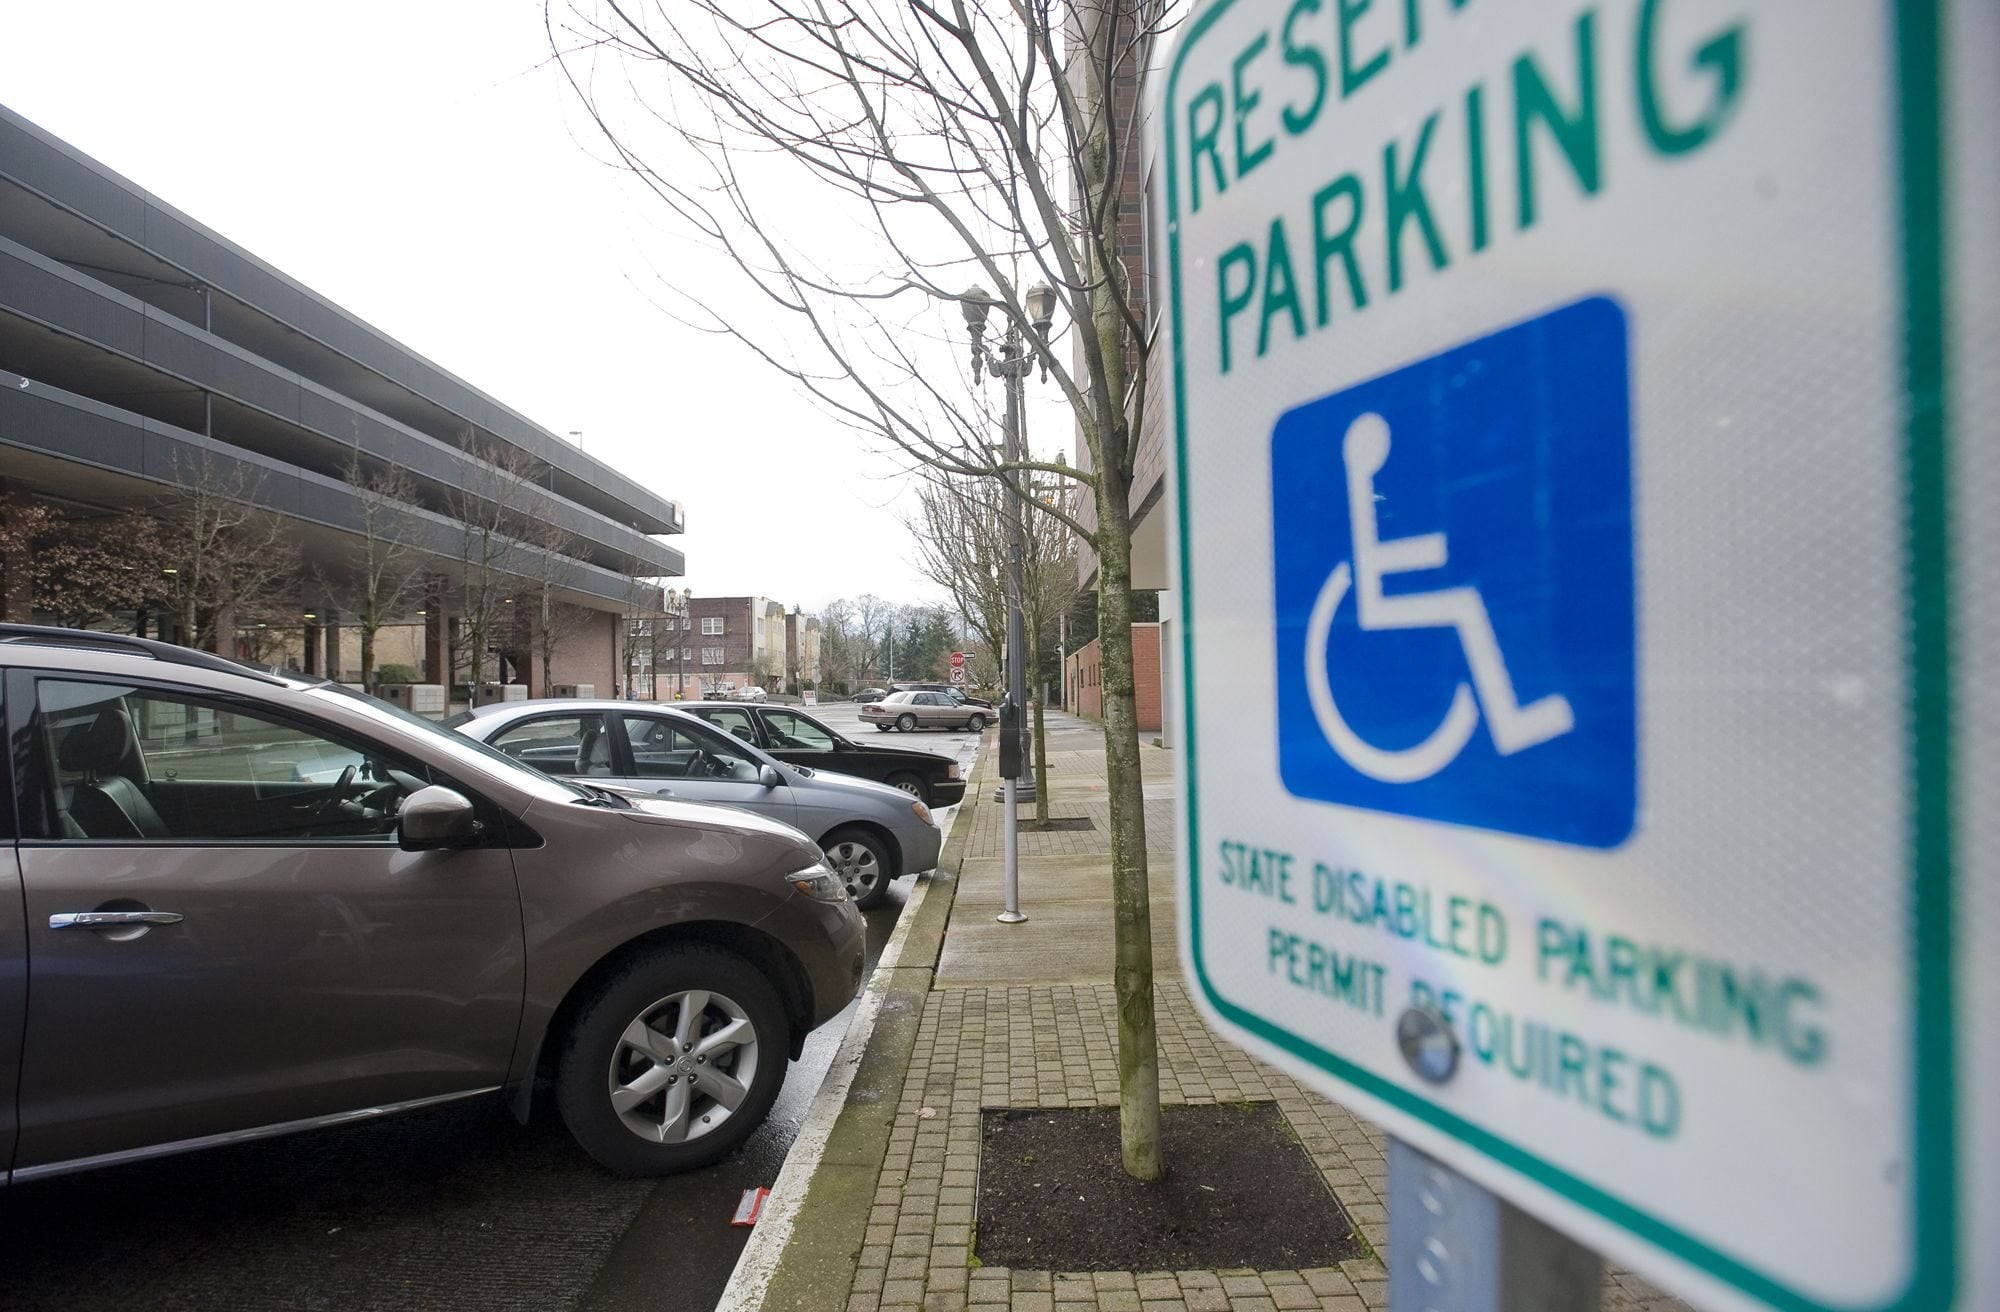 Residents of the Lewis and Clark Plaza are concerned with changes to disabled parking policies approved Monday by the Vancouver City Council.